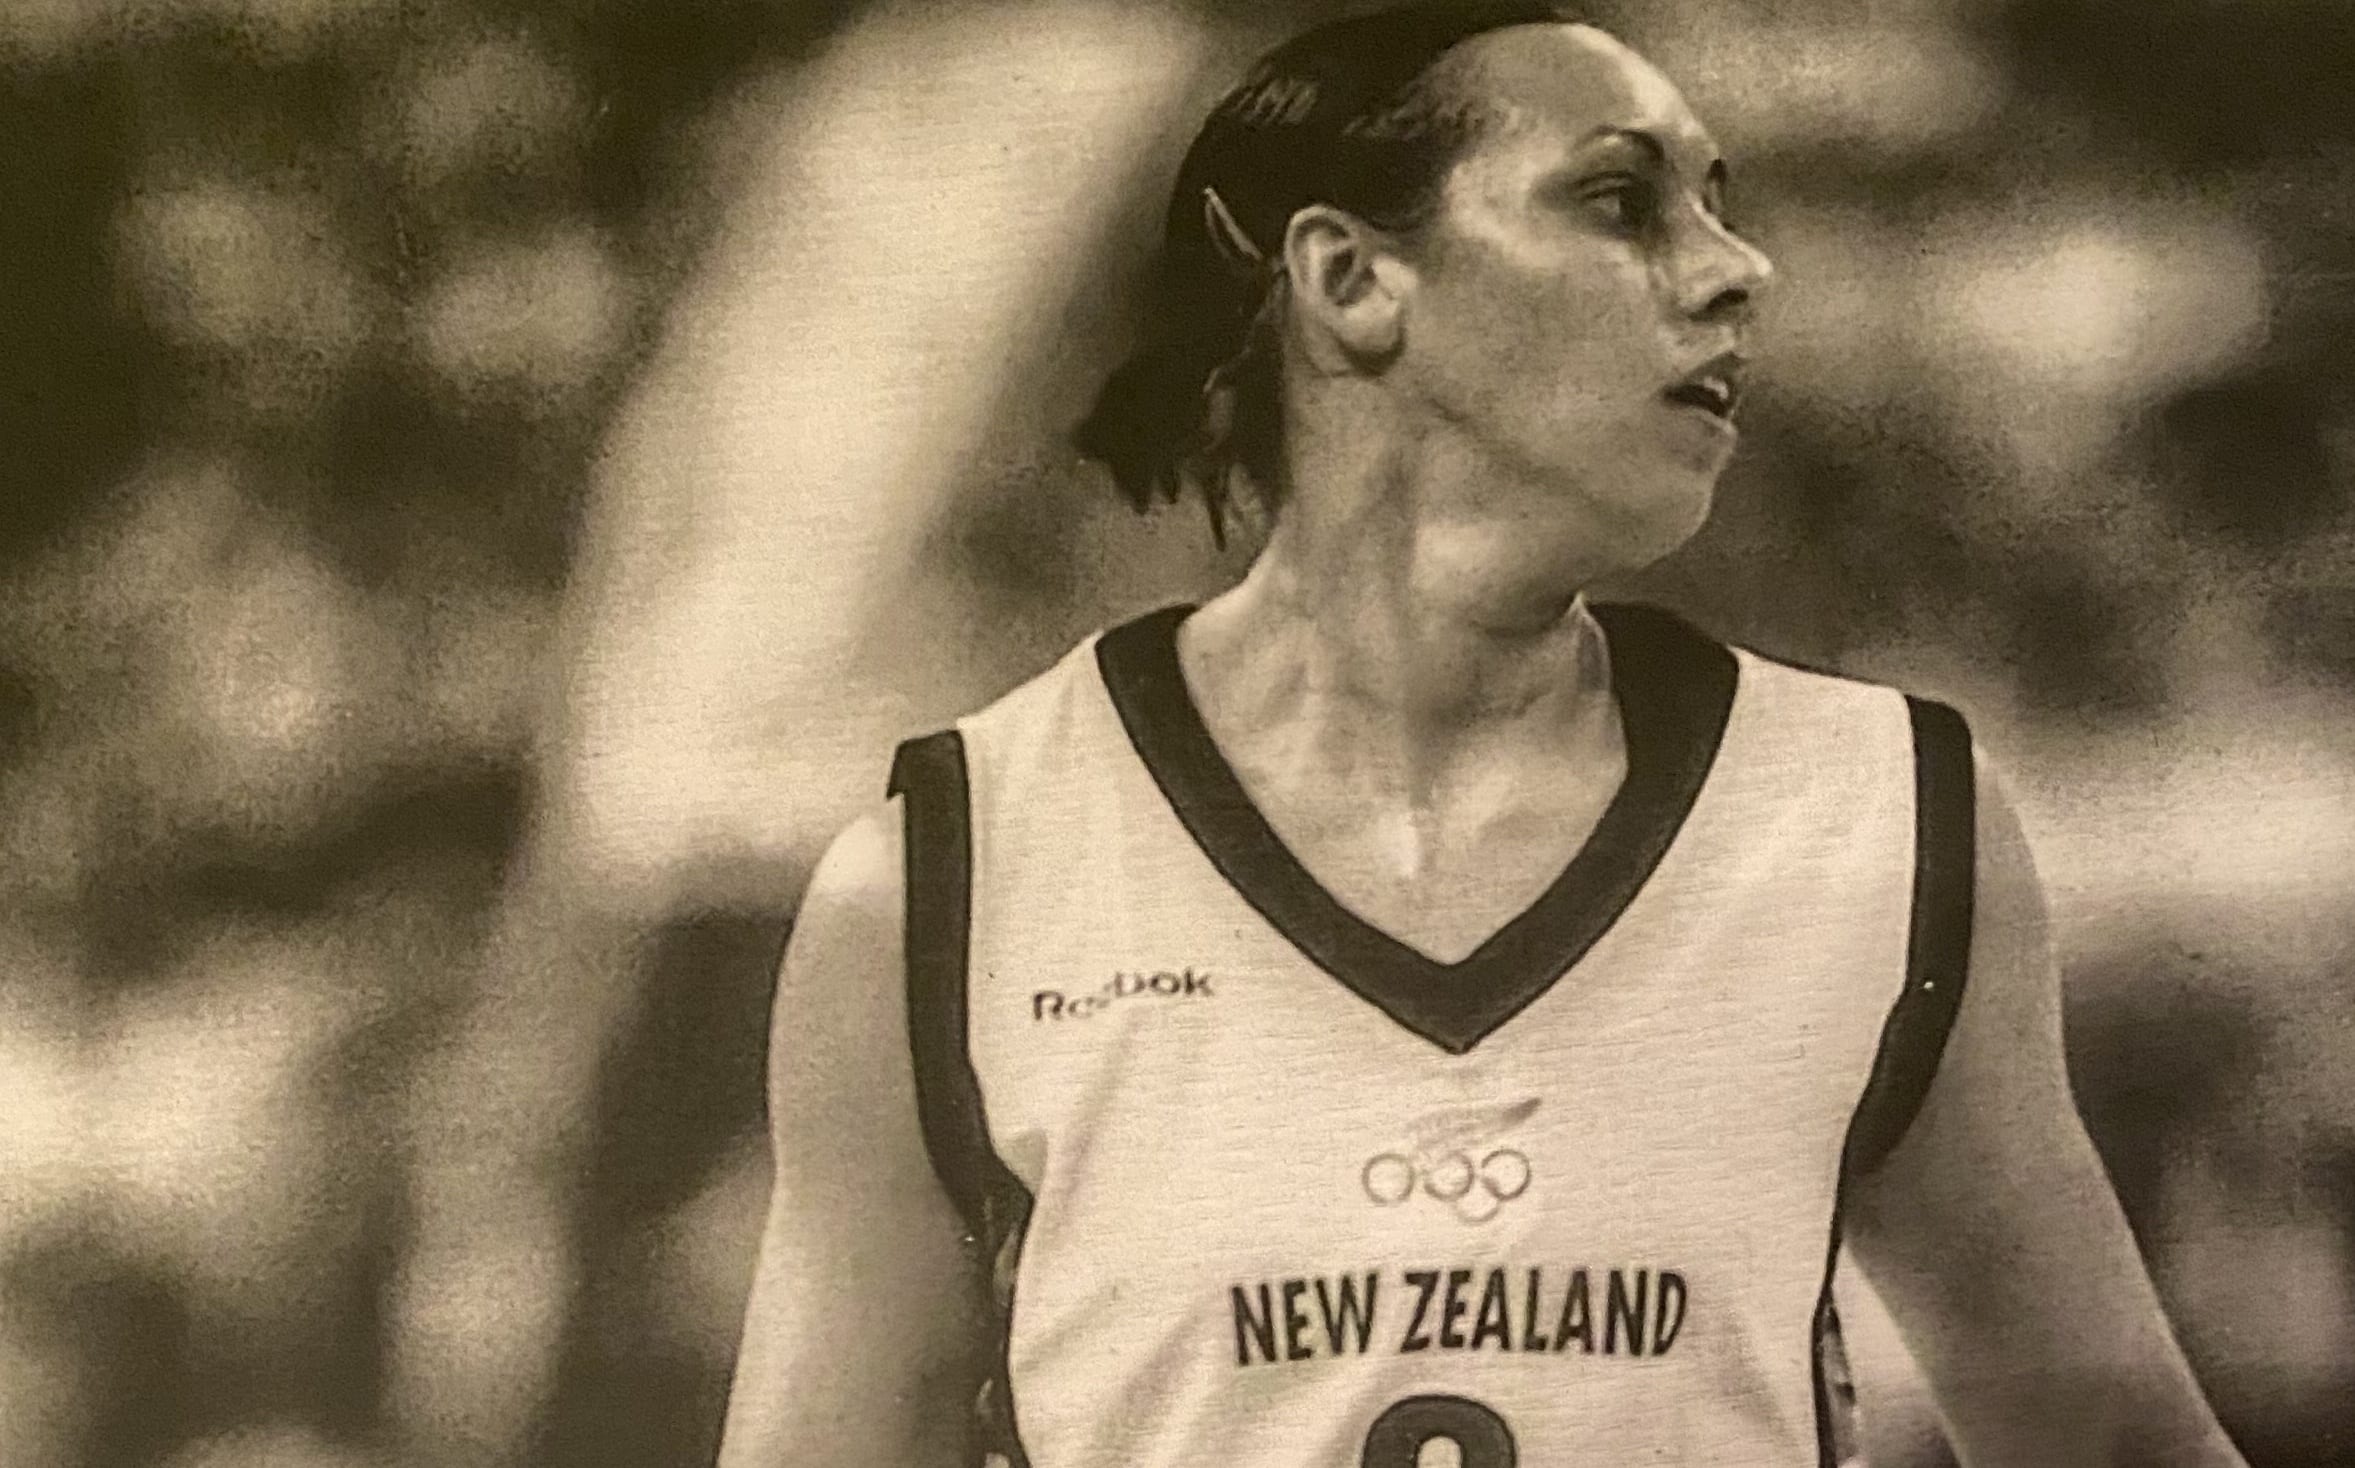 Megan competing in the Sydney 2000 games, photographed for a newspaper article.